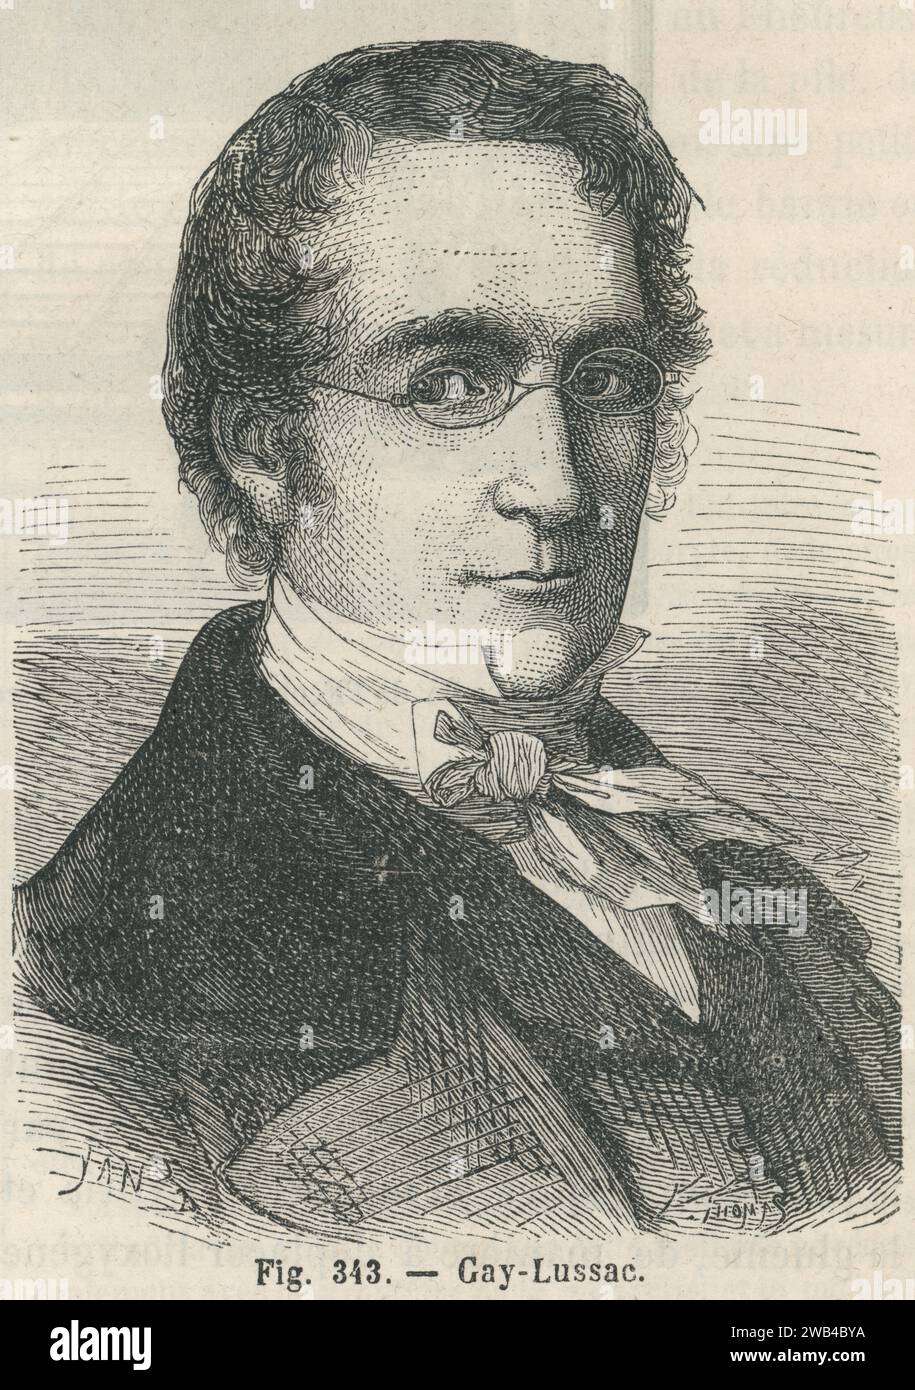 Portrait of Louis Joseph Gay-Lussac, French chemist and physicist, known for his work on the properties of gas.  Illustration from 'Les Merveilles de la science ou description populaire des inventions modernes' written by Louis Figuier and published in 1867 by Furne, Jouvet et Cie. Stock Photo